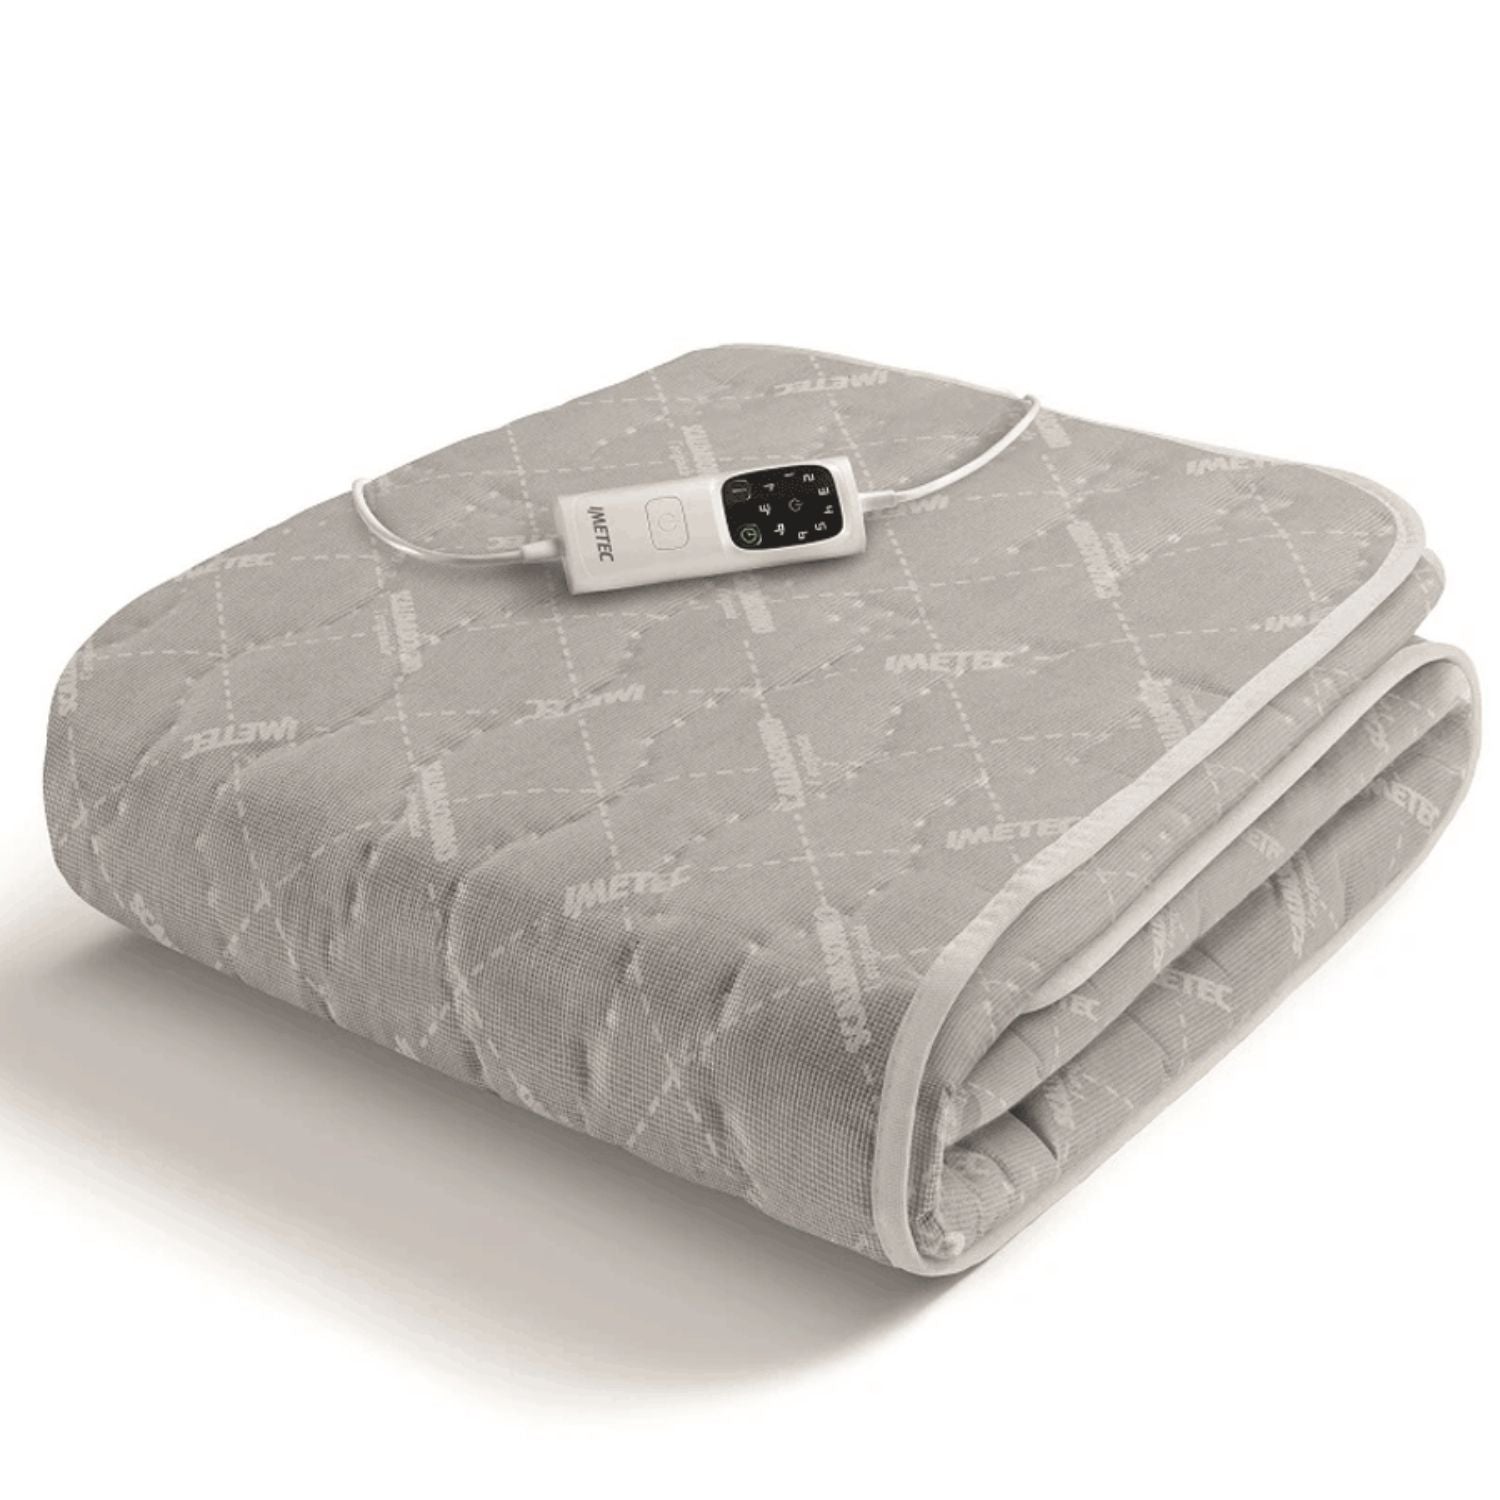 Imetec Adapto Quilted Under Blanket - Double 1 Shaws Department Stores